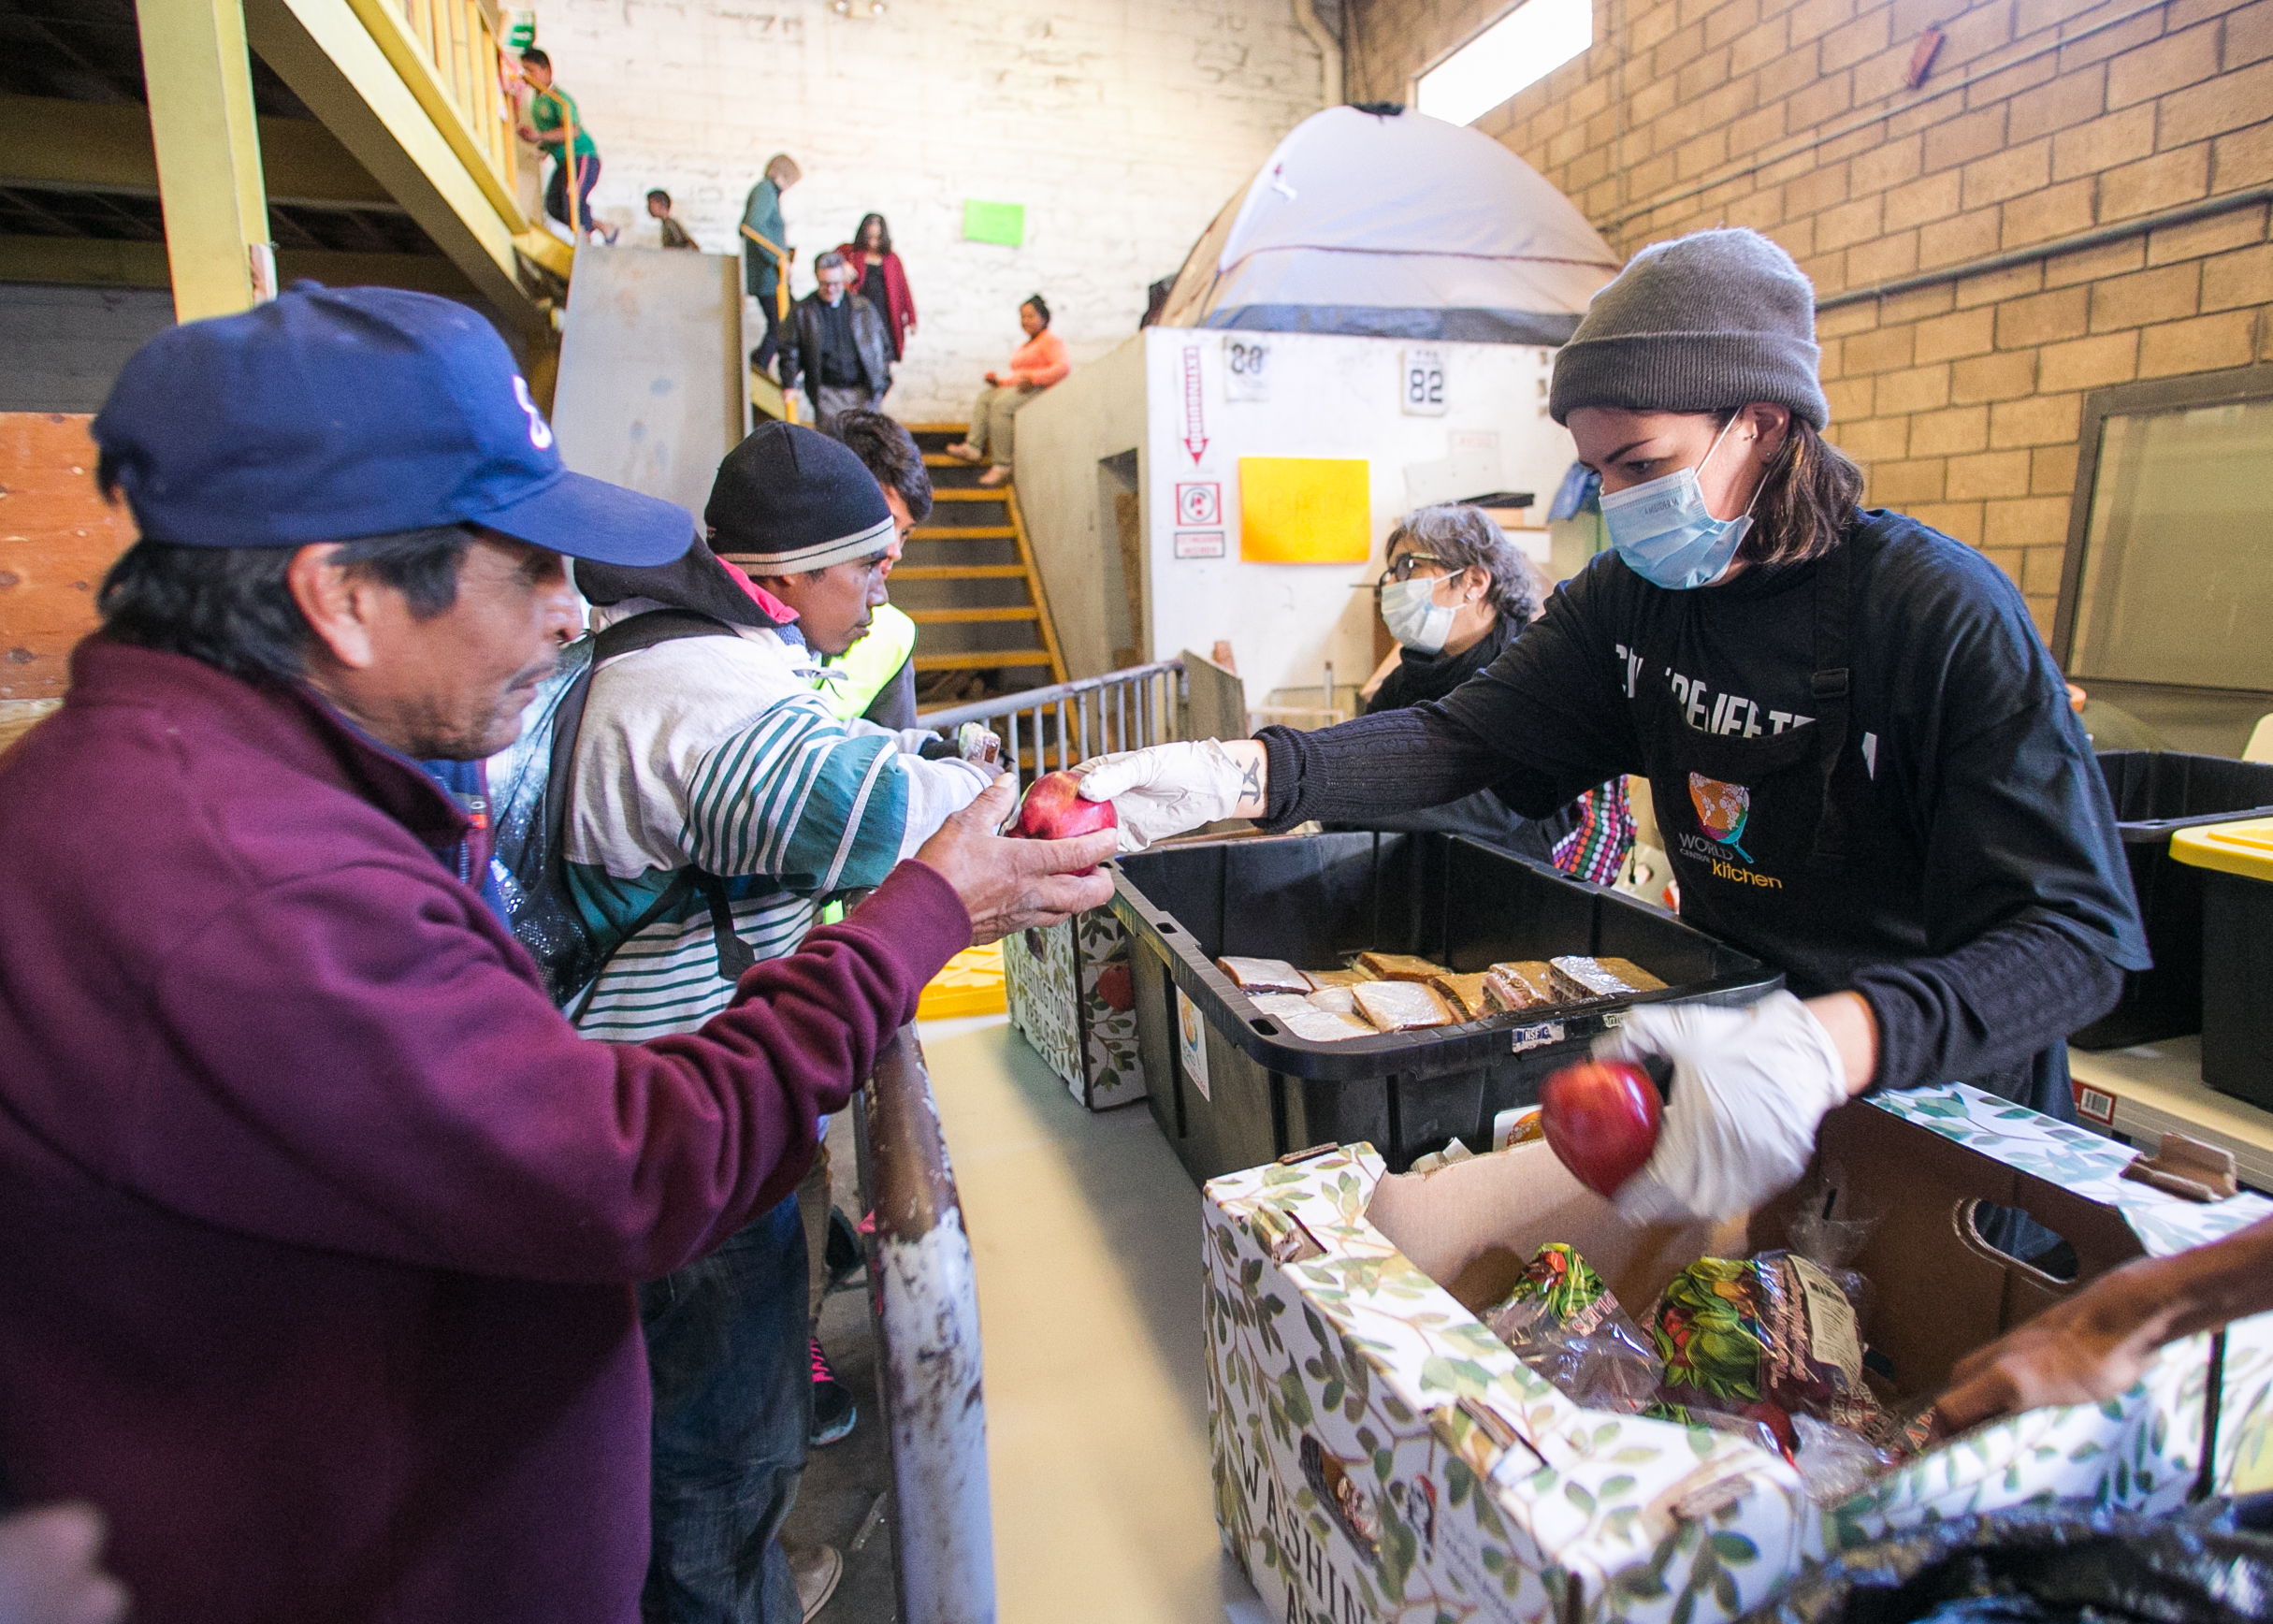  A World Central Kitchen volunteer serves refugees in the El Chinchetta compound located in Central Tijuana.  